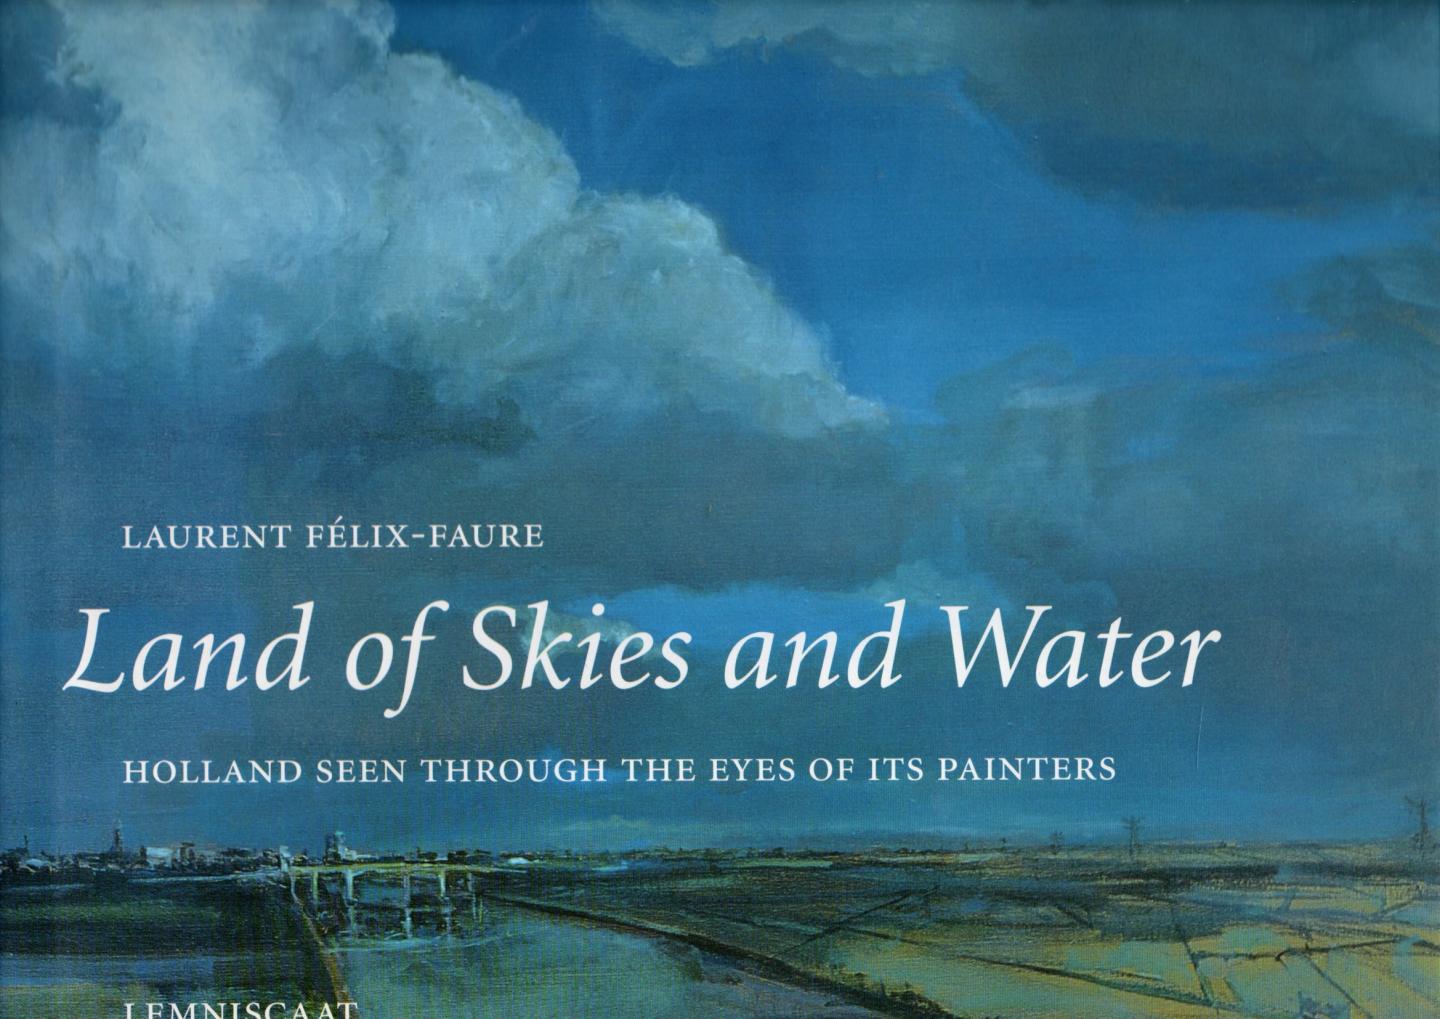 Felix-Faure, L. - Land of skies and water / Holland seen through the eyes of itspainters